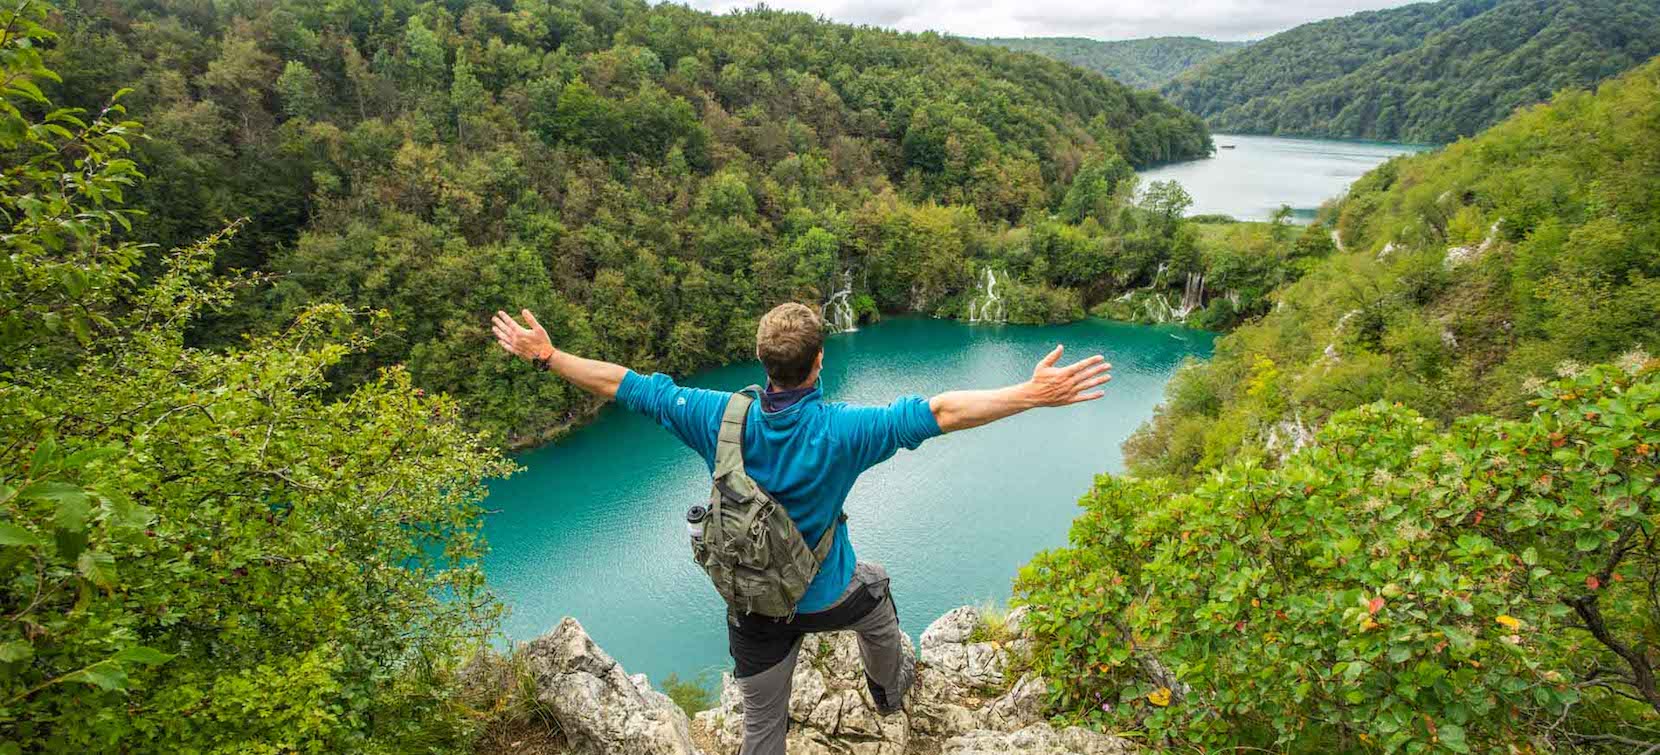 8 Day  Croatia hiking holiday an unforgettable hiking adventure. SEPTEMBER 